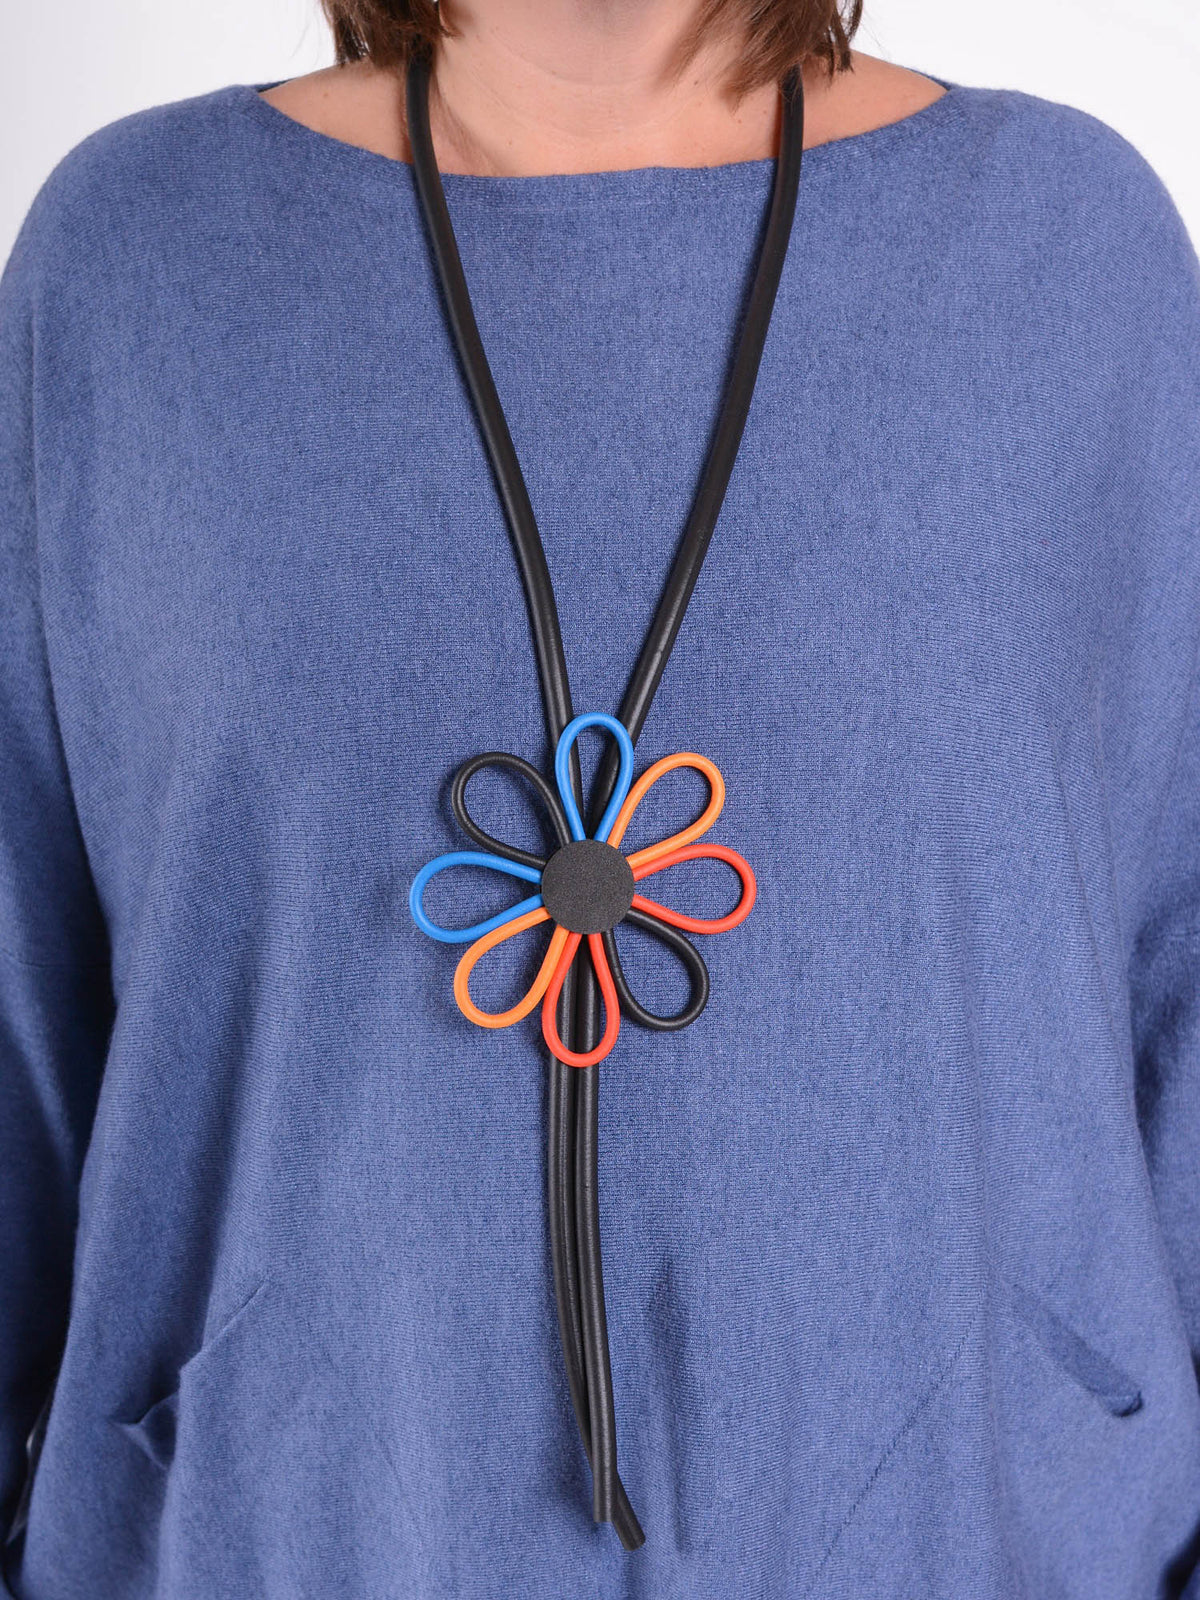 Necklace  - Multi Flower - MABLE 4, Necklaces & Pendants, Pure Plus Clothing, Lagenlook Clothing, Plus Size Fashion, Over 50 Fashion